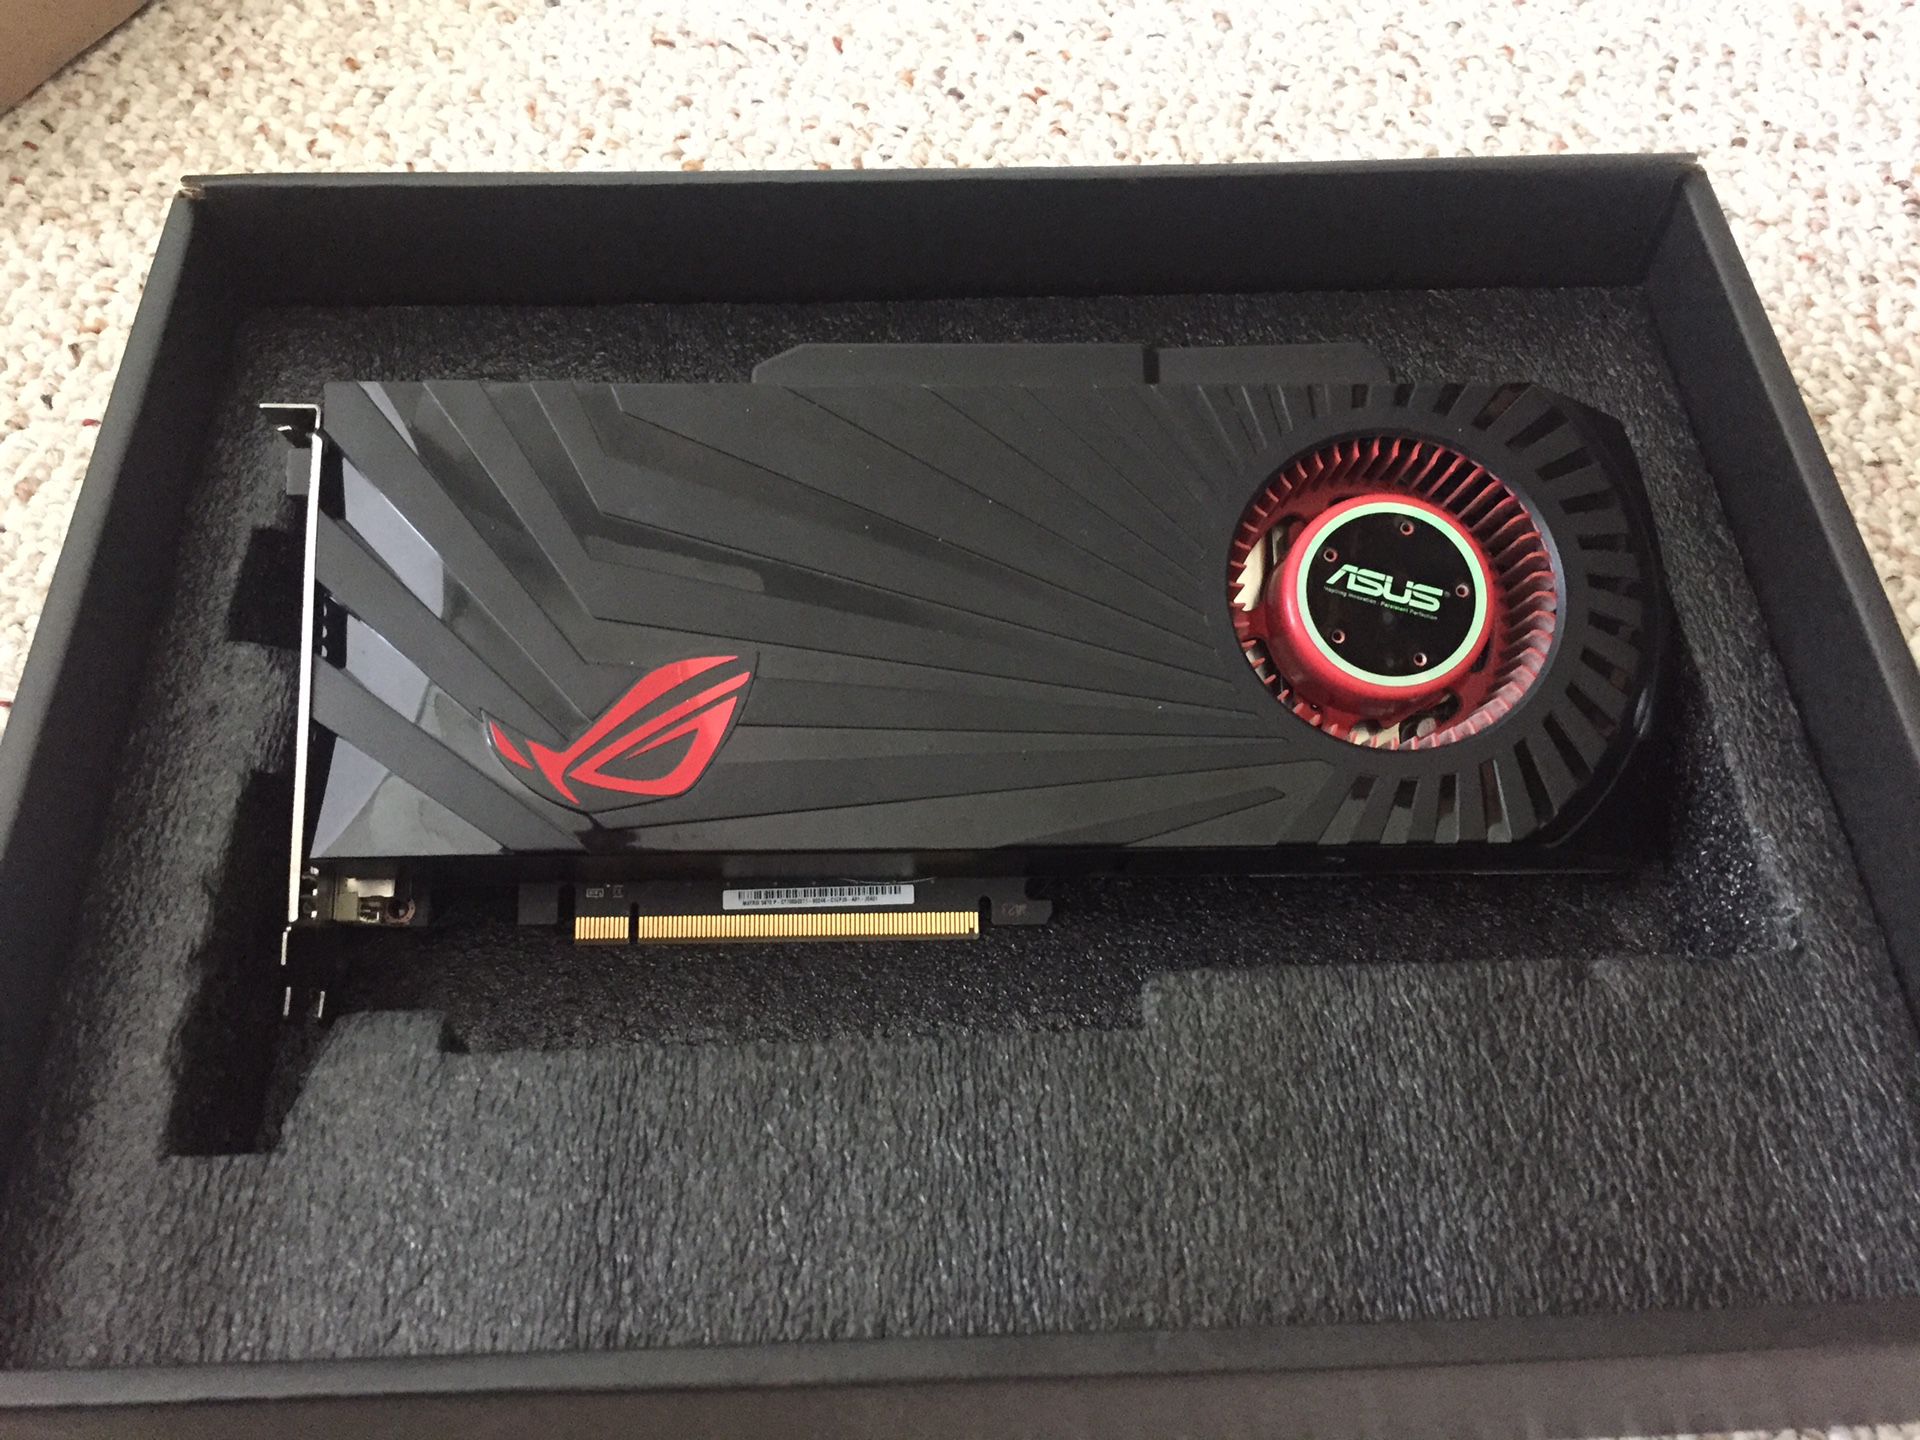 Asus Matrix 5820 Radeon video card, used, in excellent condition